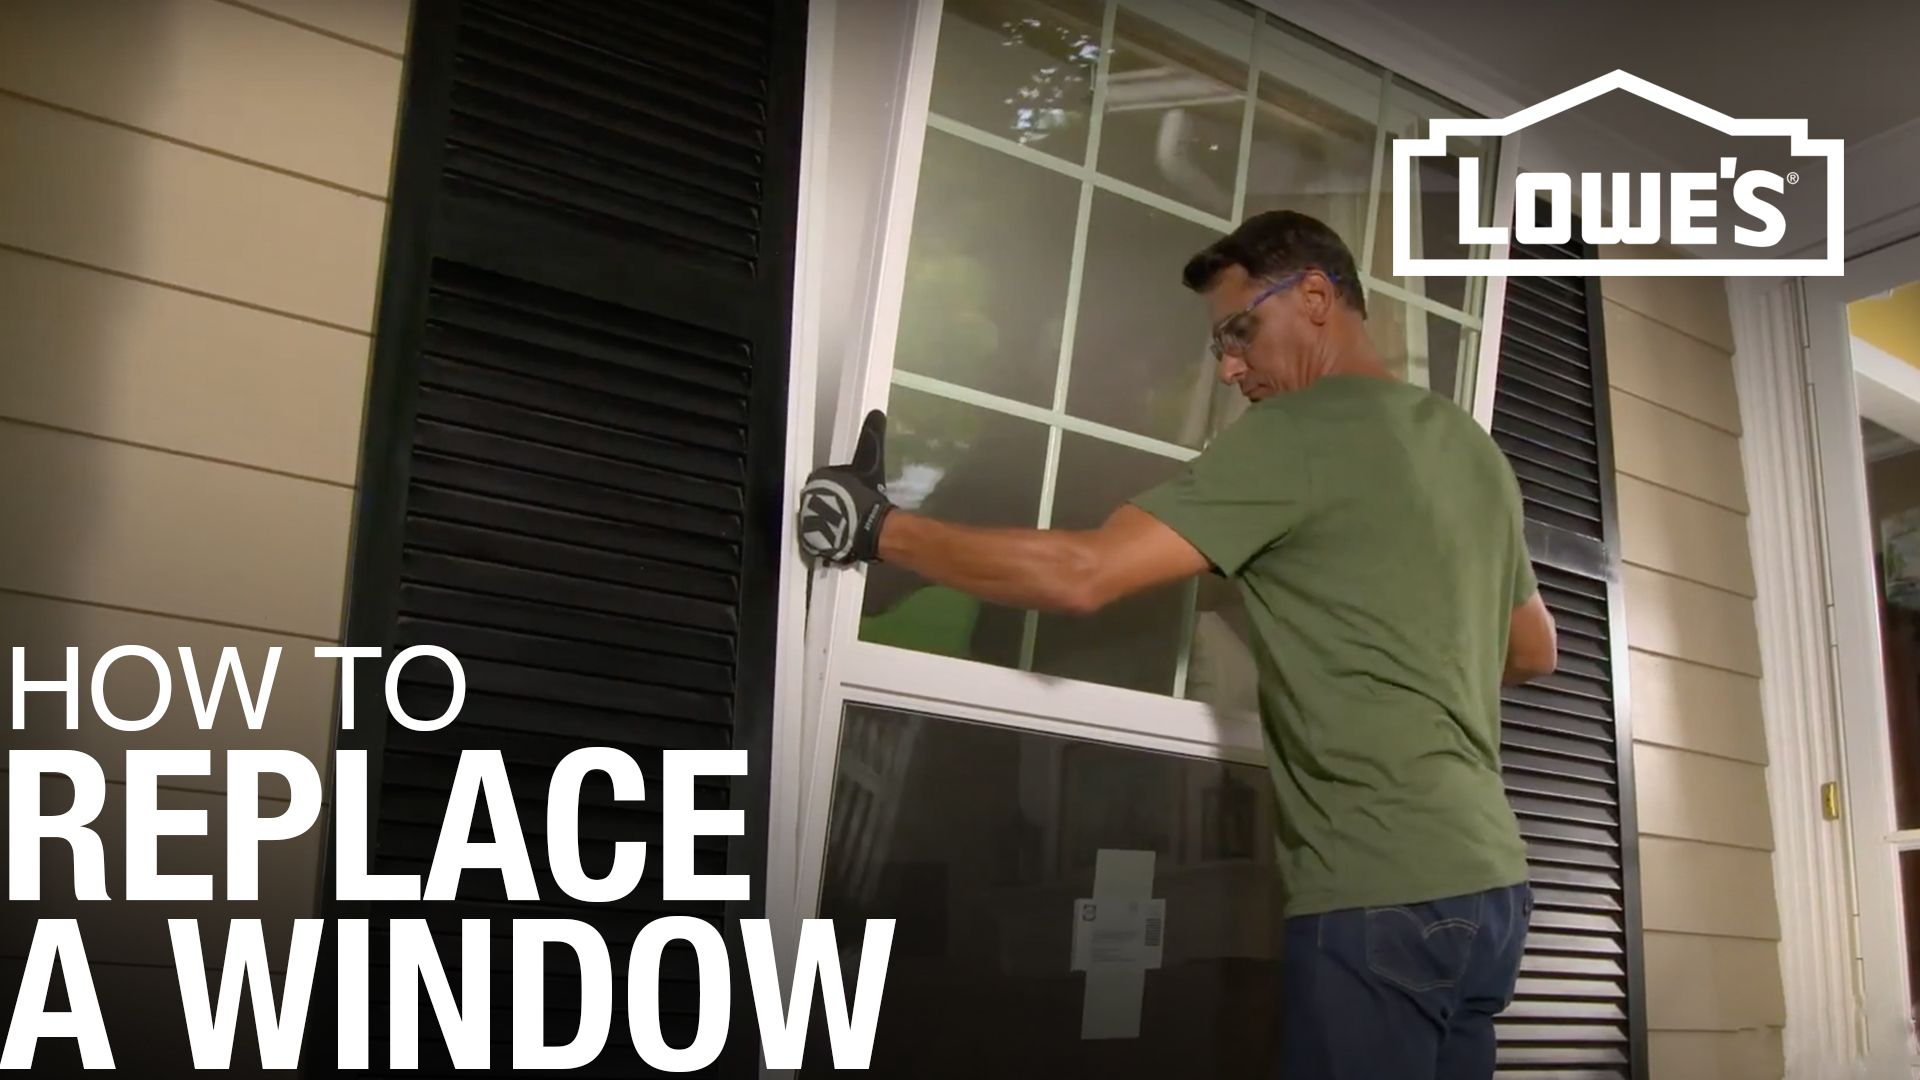 How to Install Replacement Windows   Lowe's